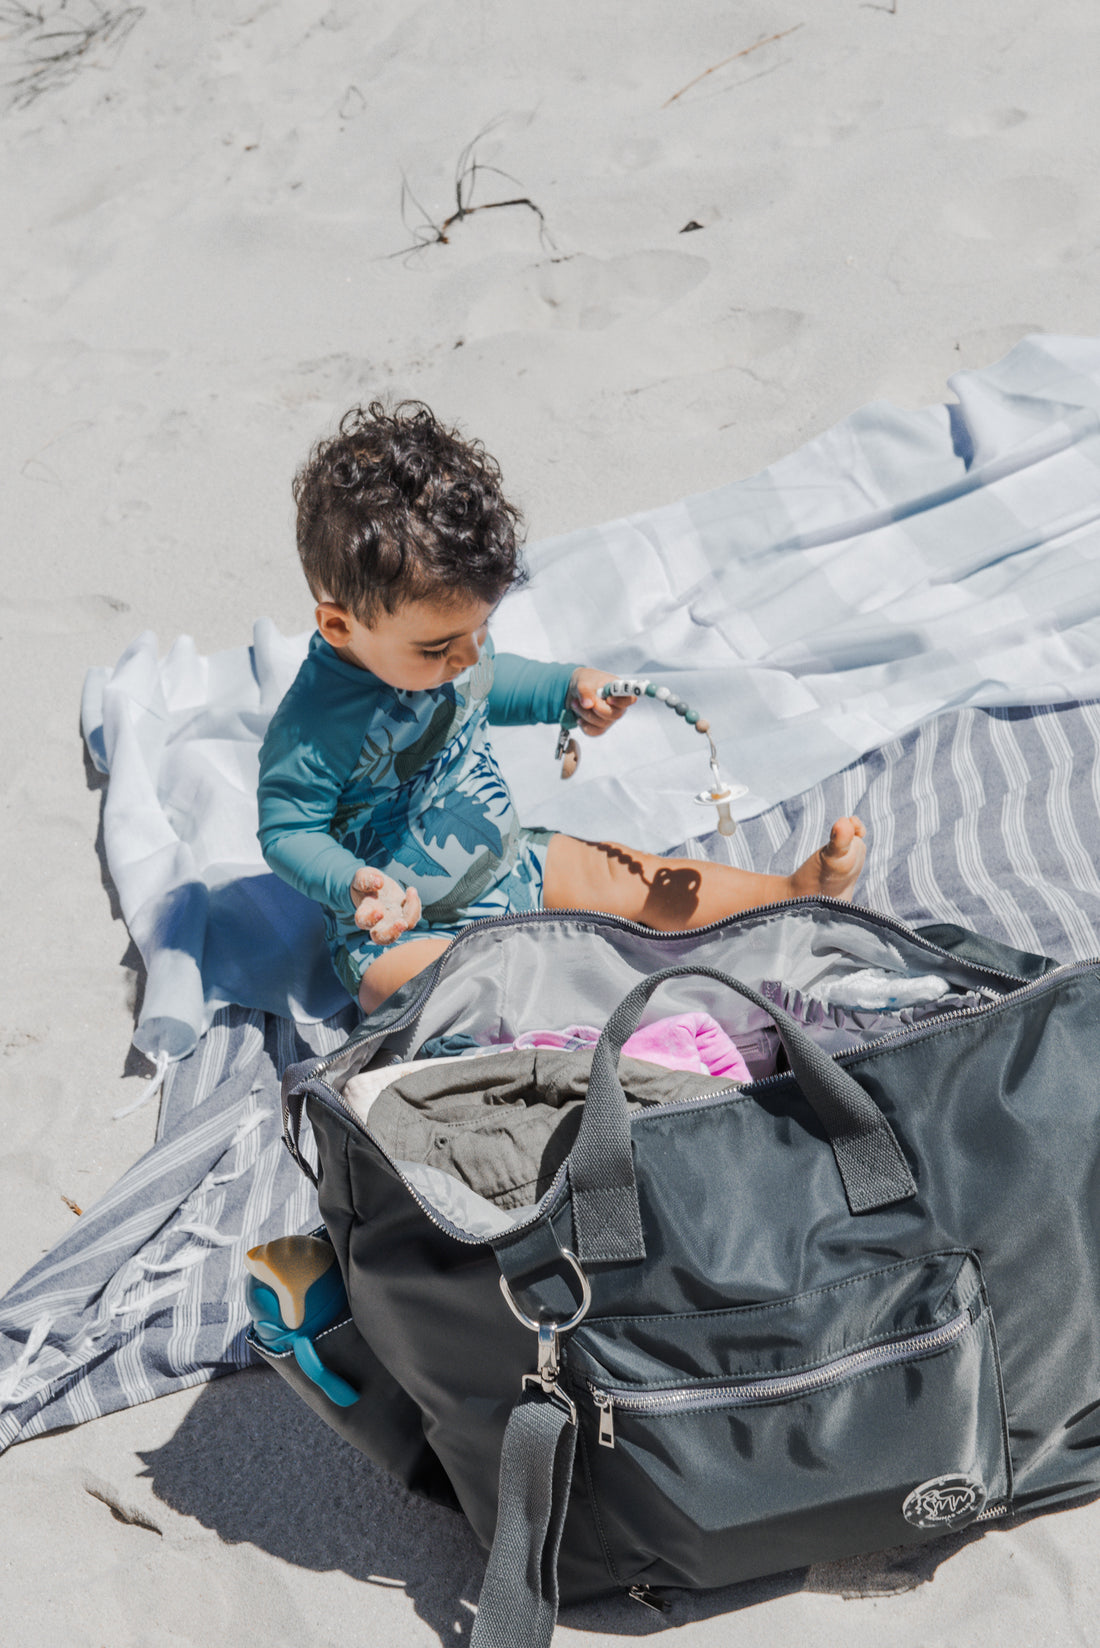 The DUFFLE Nappy Bag in Chaos + Calm (charcoal) sitting on beach towel next to baby boy.